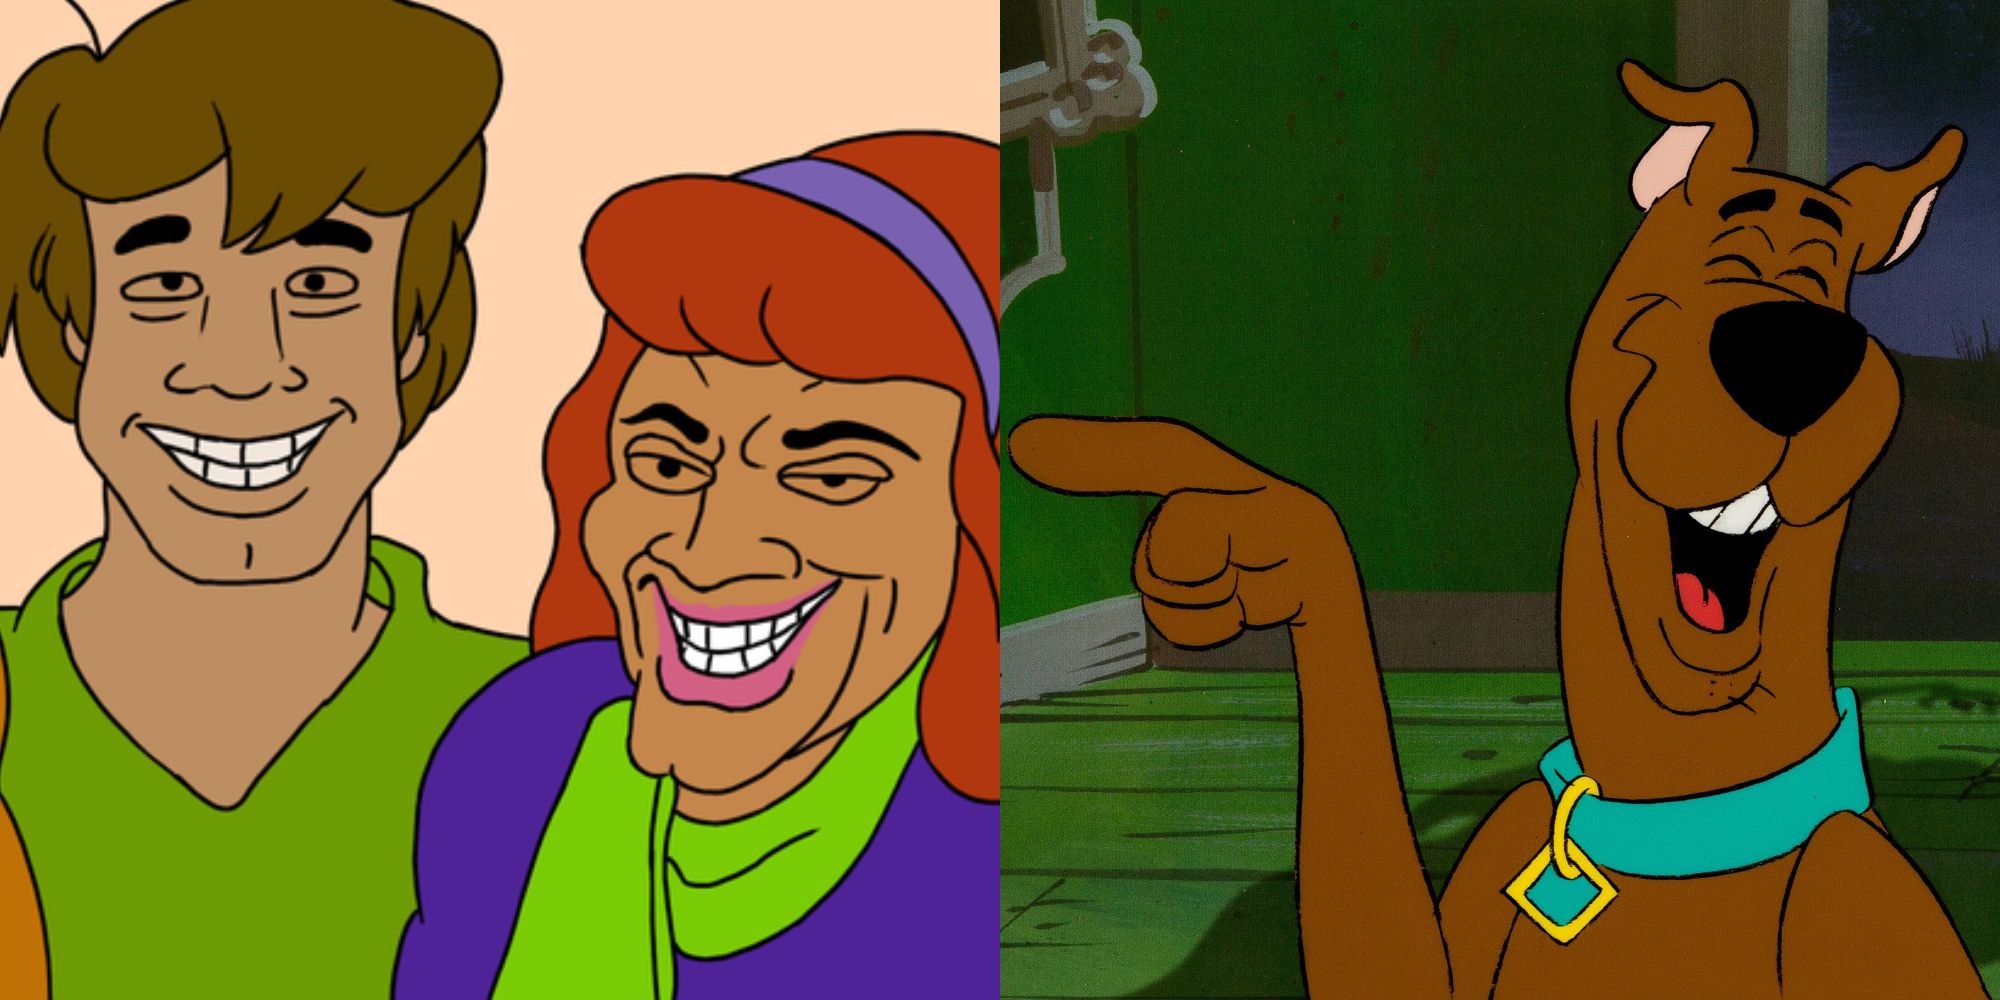 Split image of a Scooby Doo meme and Scooby laughing